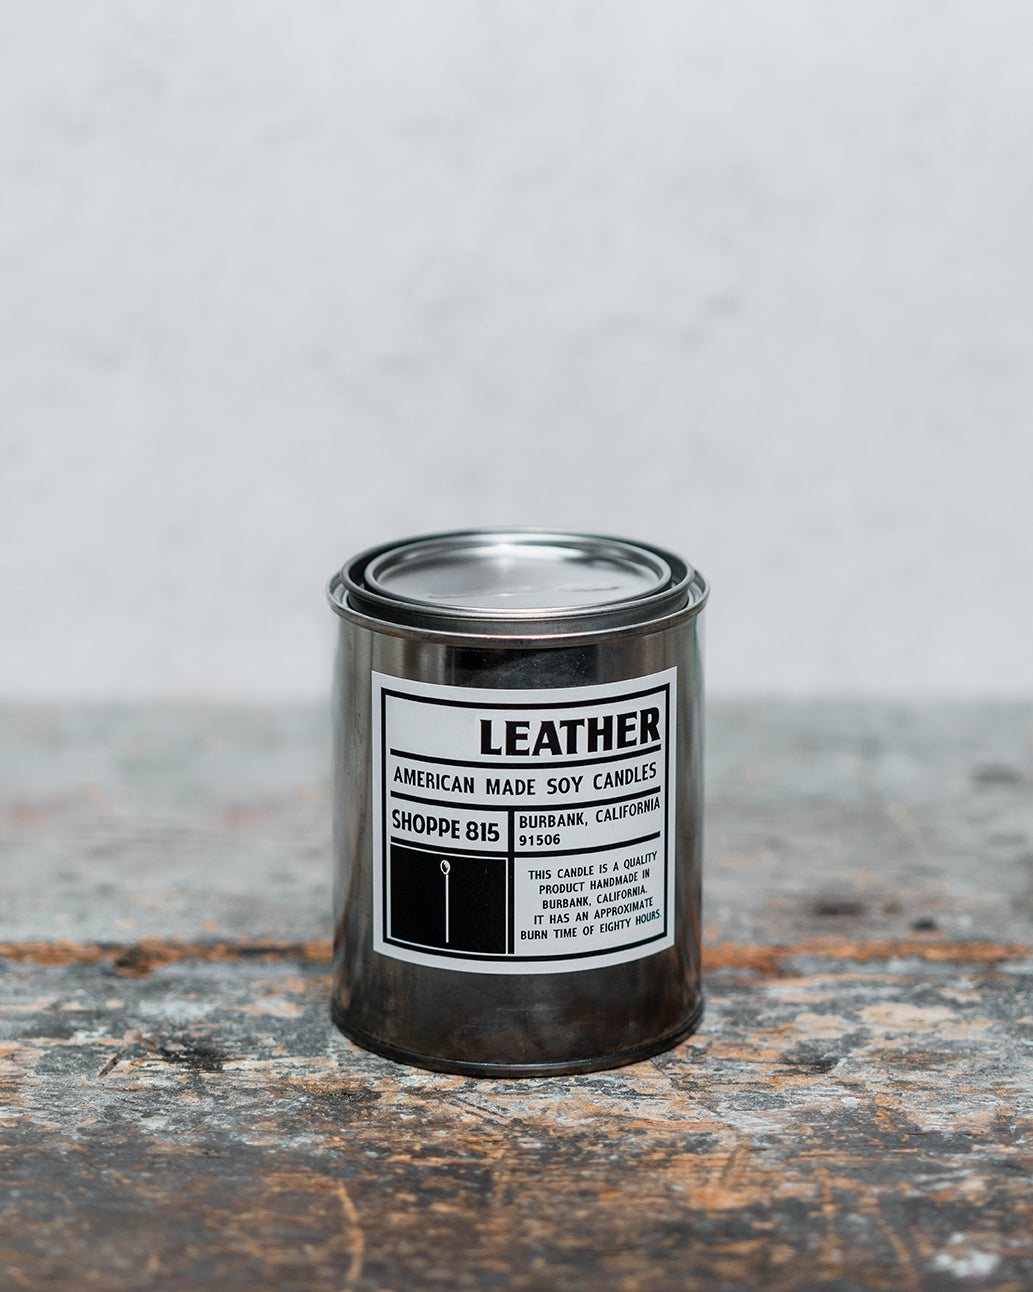 Leather gender neutral tin candle on wooden shelf